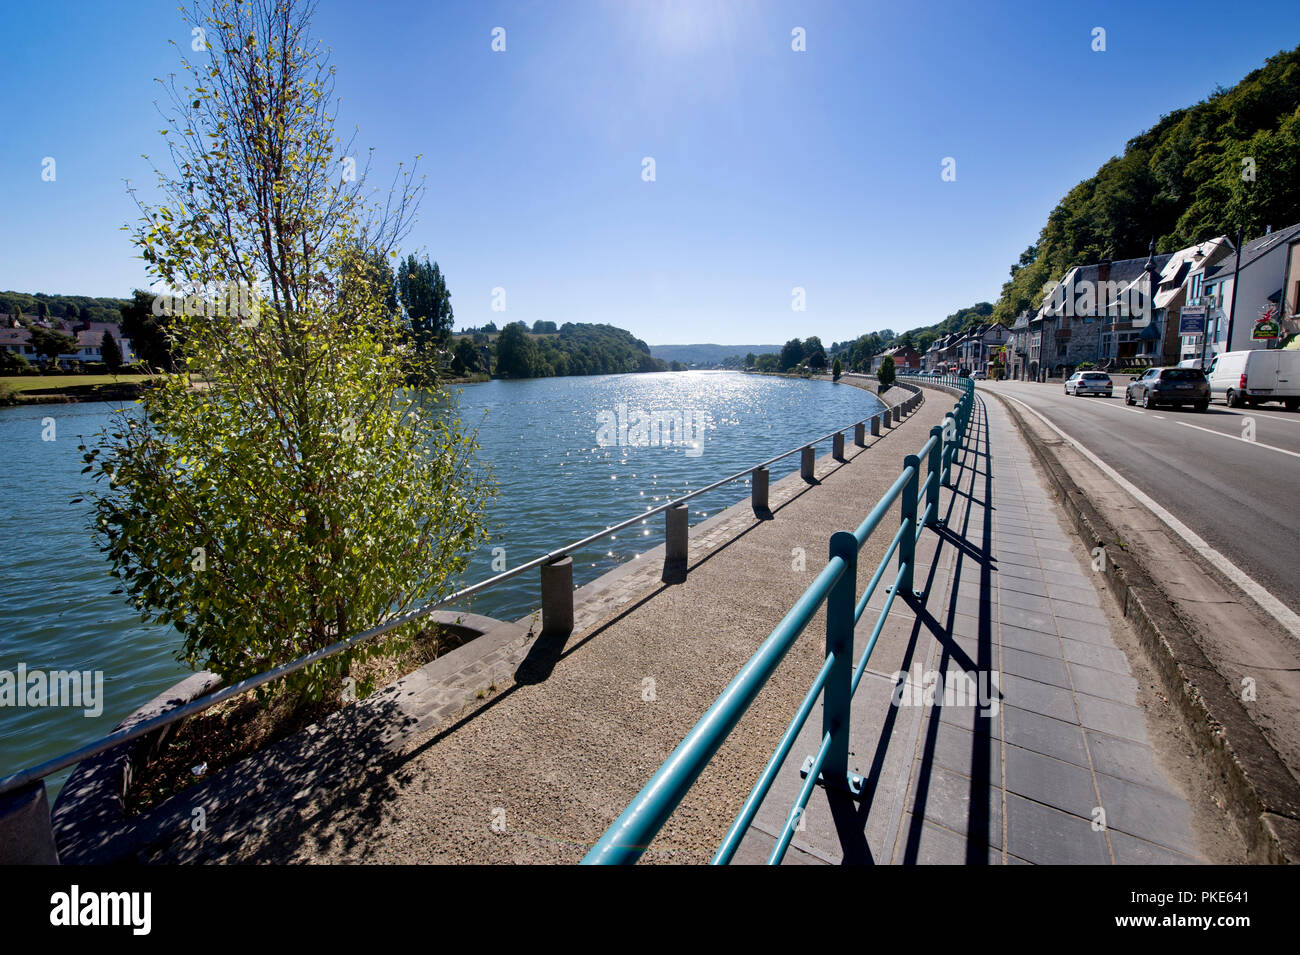 The Chaussée de Dinant road along the Meuse river during the Summer in Wepion (Belgium, 05/09/2013) Stock Photo